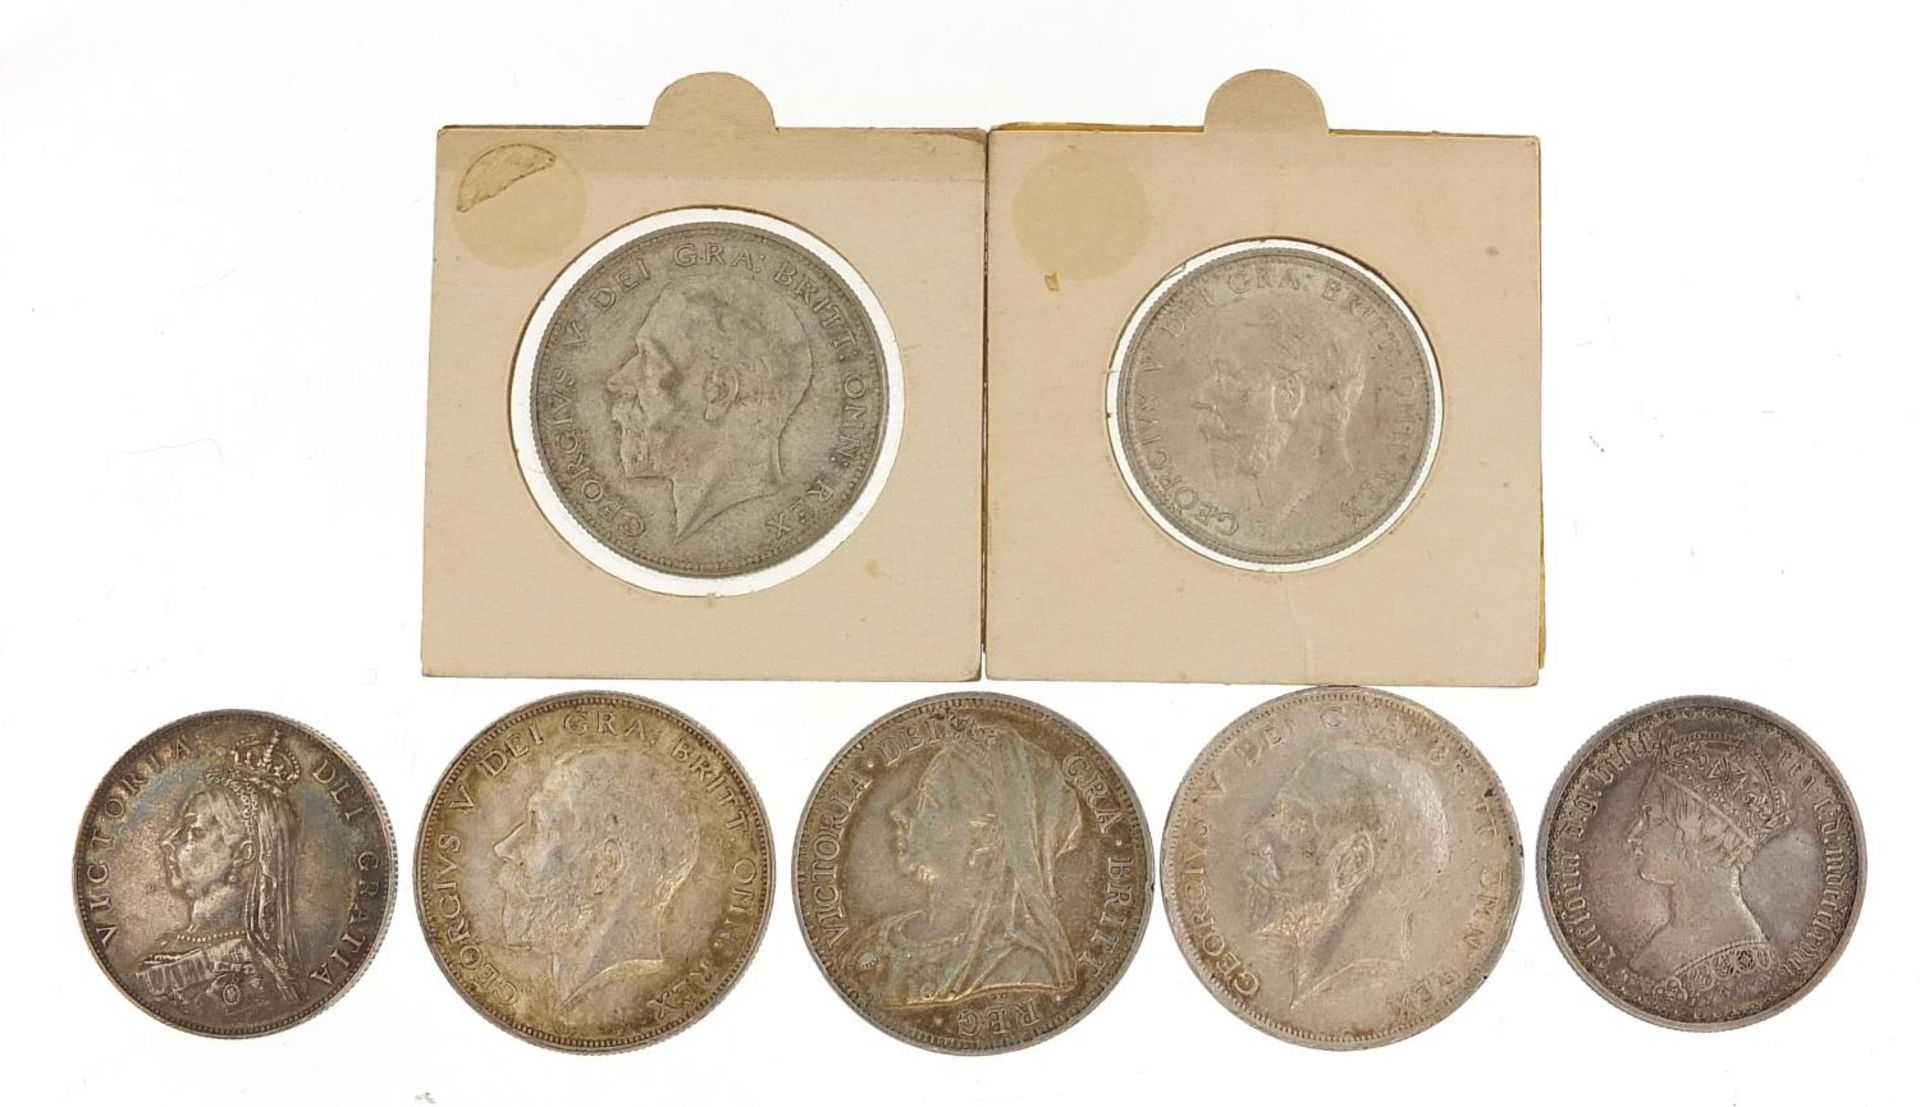 Victorian and later British coinage including Gothic florin, 1901 half crown and 1928 florin